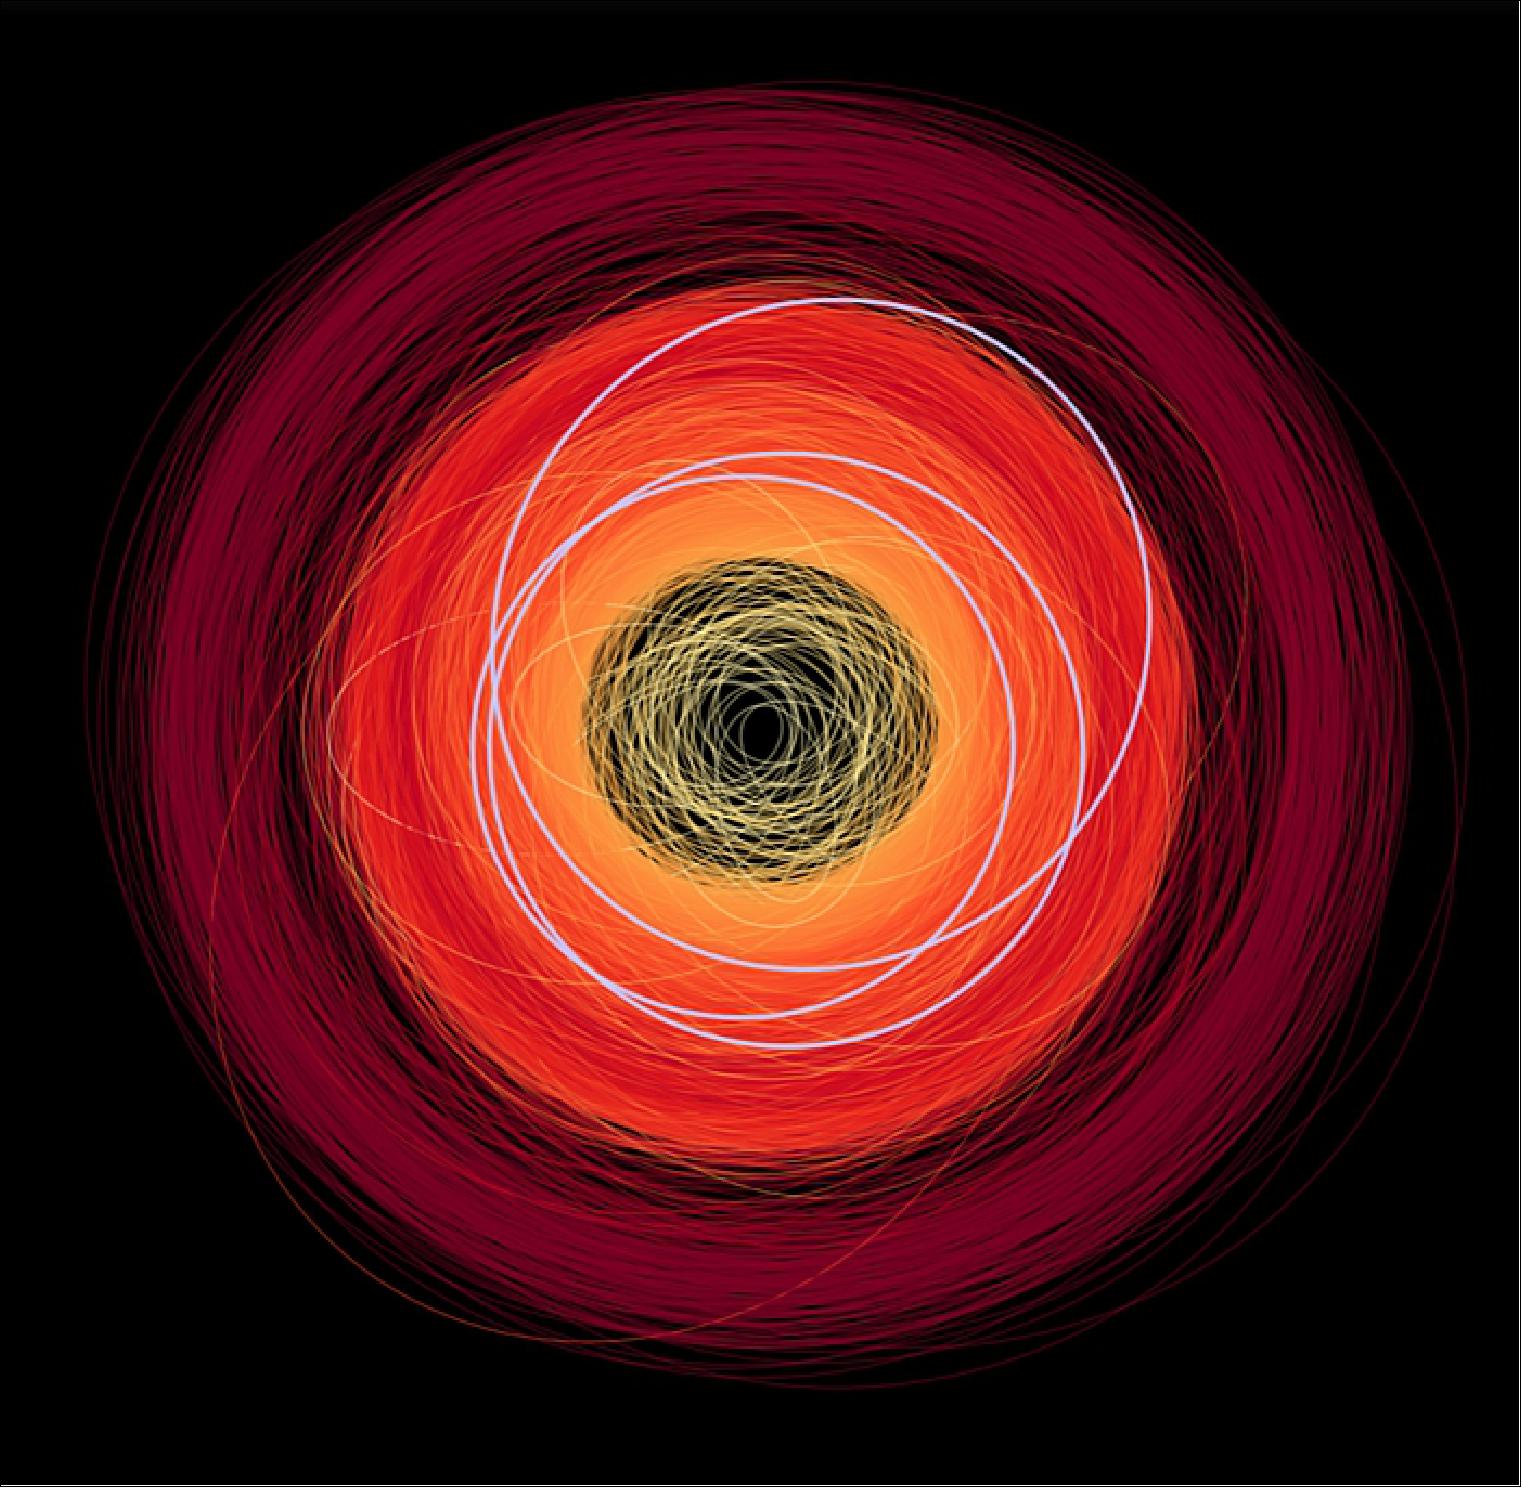 Figure 19: This view shows the orbits of more than 14,000 known asteroids (with the Sun at the center of the image) based on information from Gaia's second data release, which was made public in 2018. The majority of asteroids depicted in this image, shown in bright red and orange hues, are main-belt asteroids, located between the orbits of Mars and Jupiter; Trojan asteroids, found around the orbit of Jupiter, are shown in dark red. In yellow, towards the image center, are the orbits of several tens of near-Earth asteroids observed by Gaia: these are asteroids that come to within 1.3 astronomical units (AU) to the Sun at the closest approach along their orbit. The Earth circles the Sun at a distance of 1 AU (around 150 million km) so near-Earth asteroids have the potential to come into proximity with our planet (image credit: ESA/Gaia/DPAC)